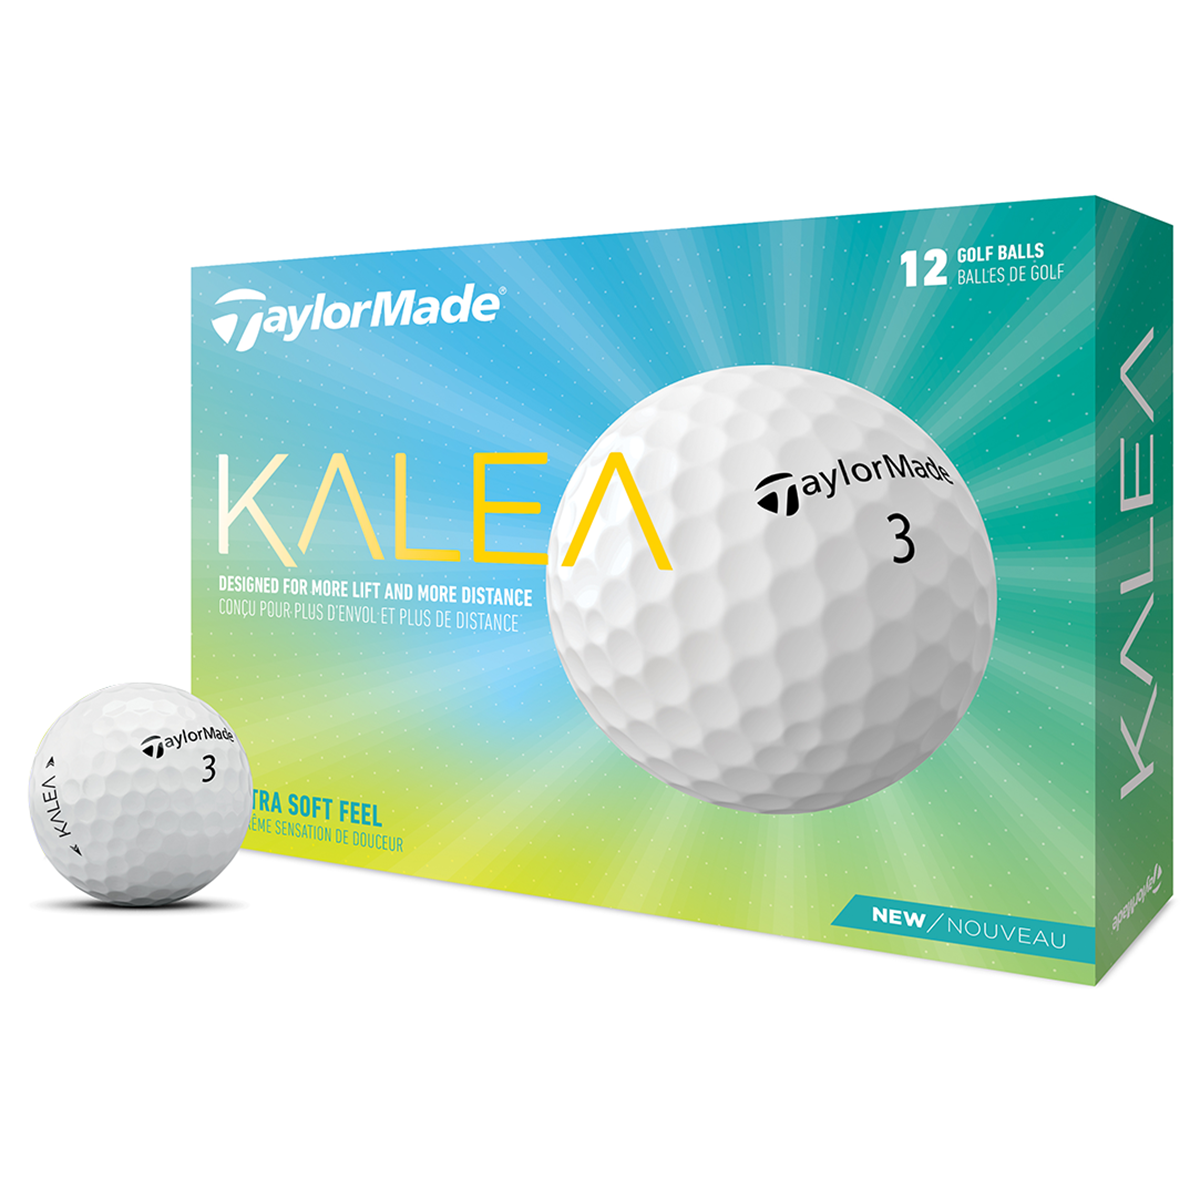 TaylorMade White Dimple Kalea 12 Golf Ball Pack 2022| American Golf, One Size von TaylorMade